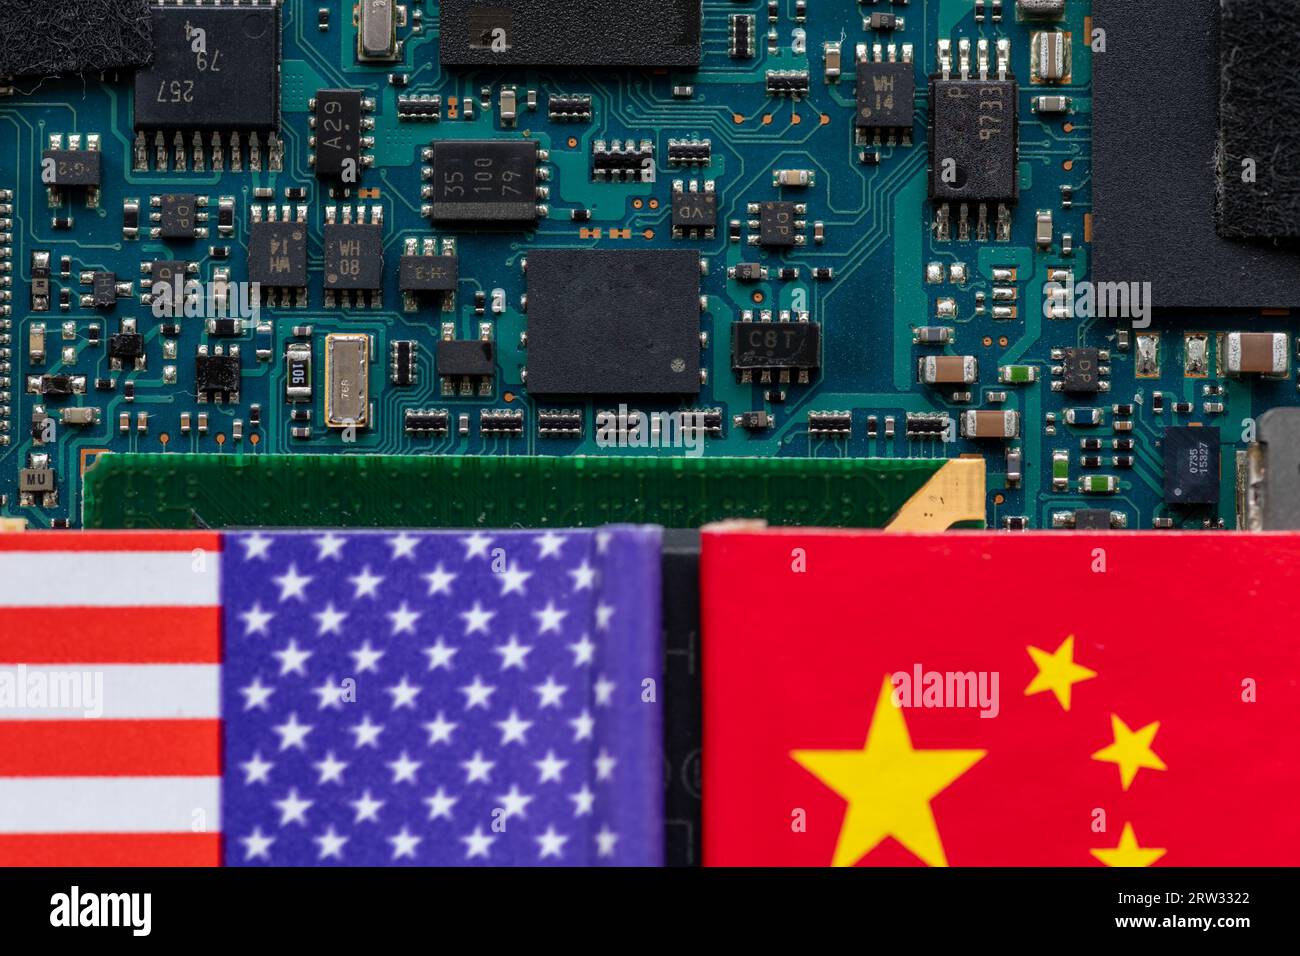 A technology conflict, competition concept with the American and Chinese flags on top of a semiconductor circuit board. Stock Photo